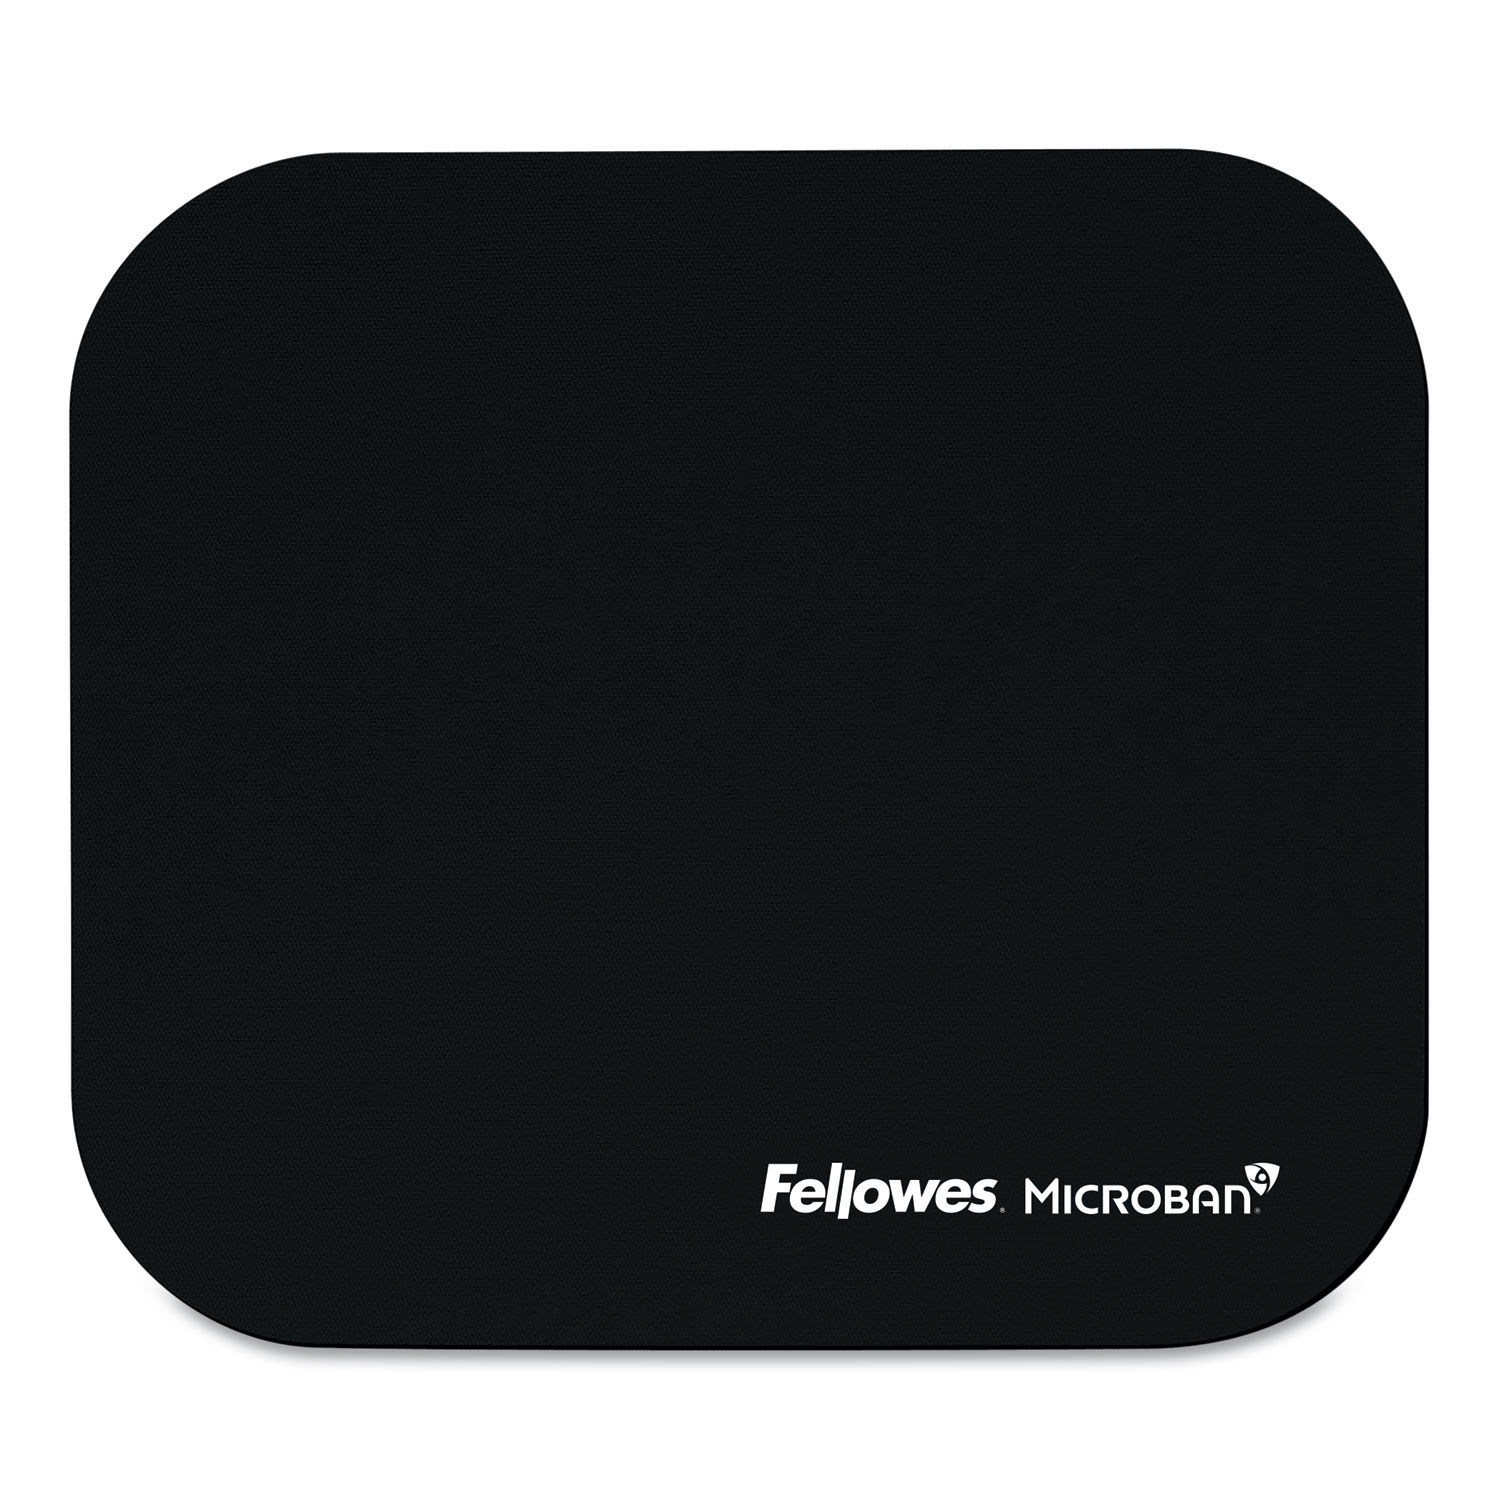 Mouse Pad with Microban Protection 9 x 8, Black